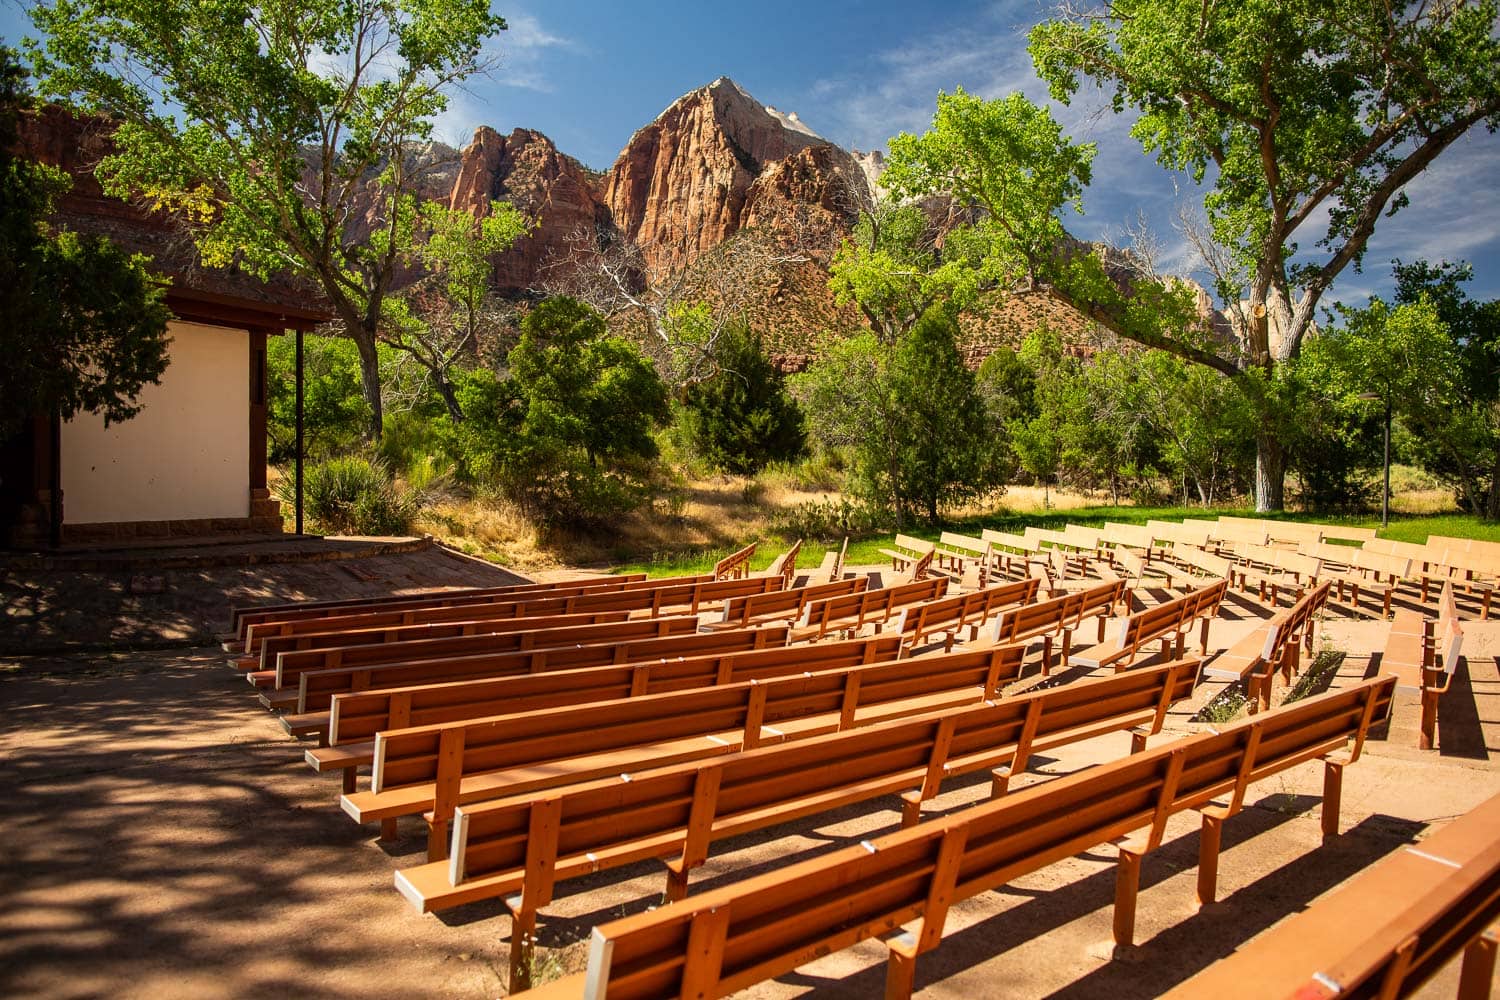 A side view of the Camground Amphitheater elopement location seating area in Zion.